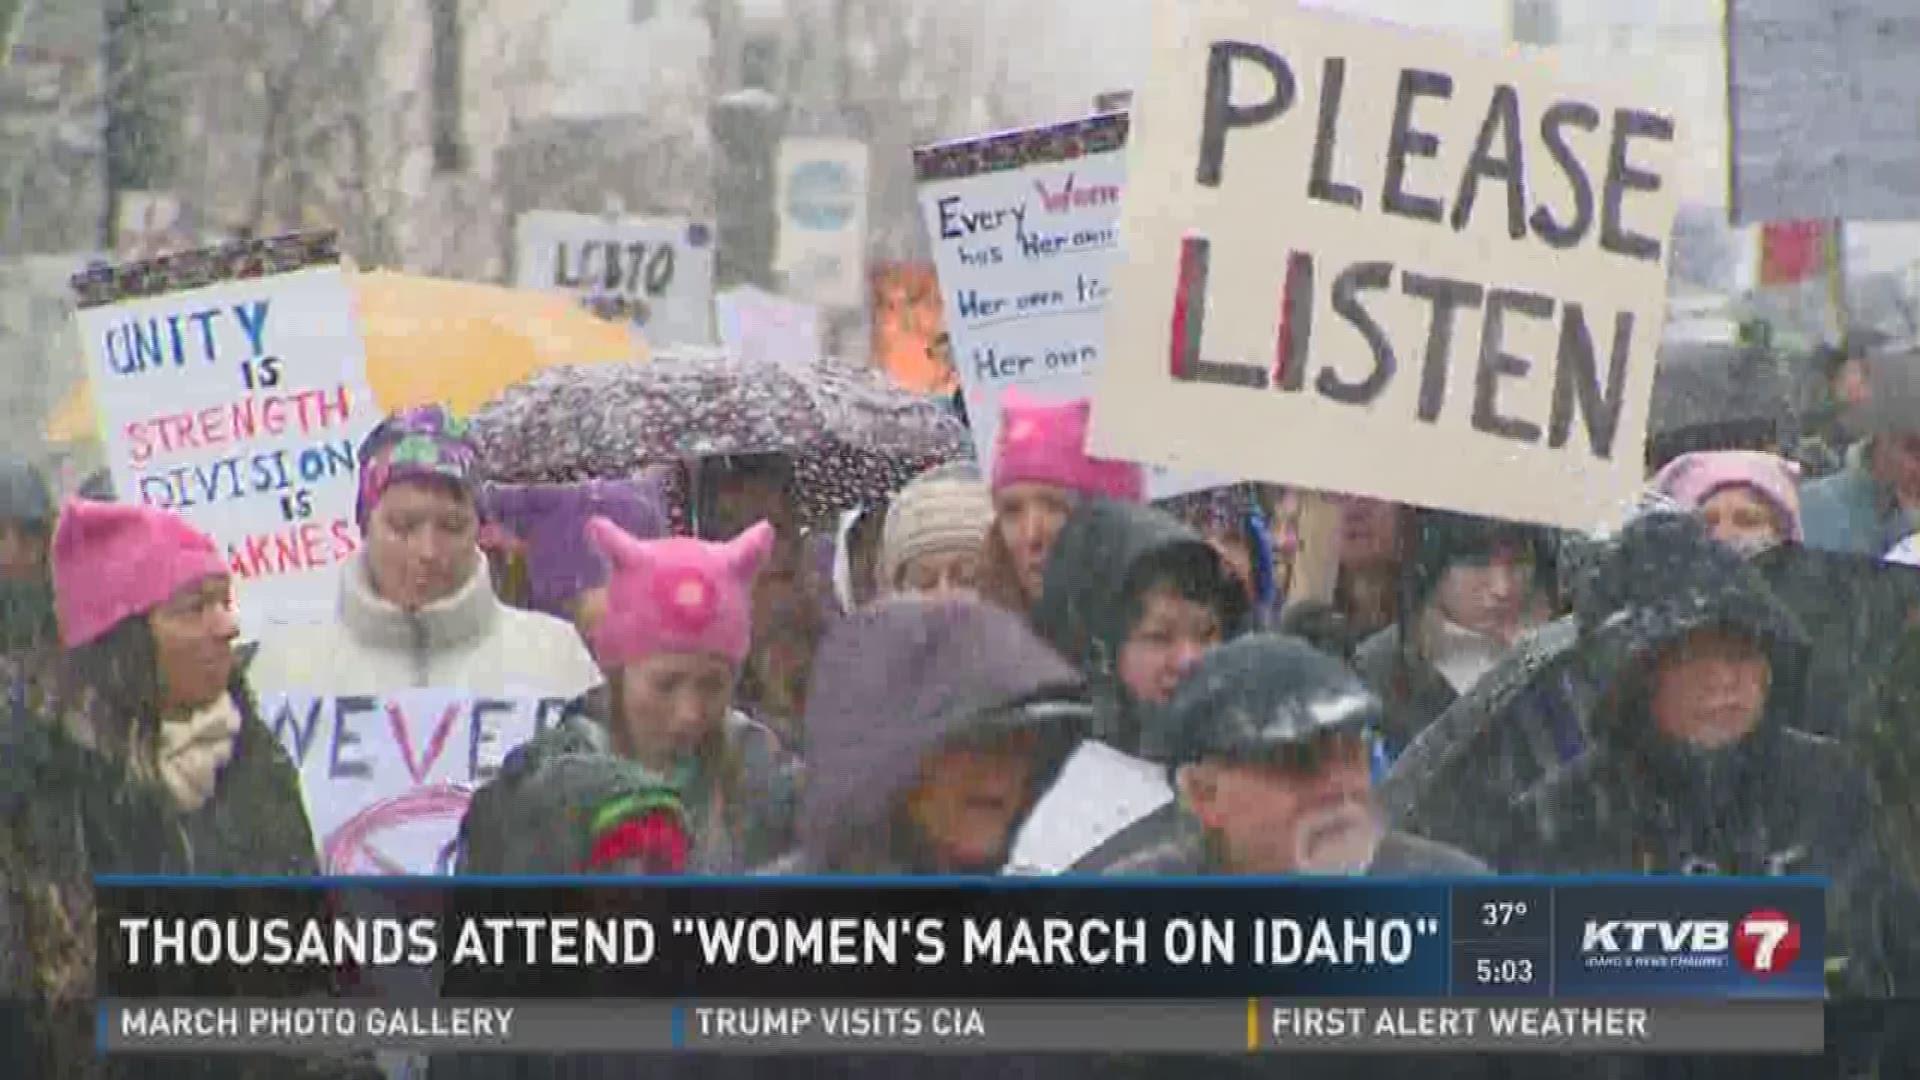 Thousands attend Women's March on Idaho